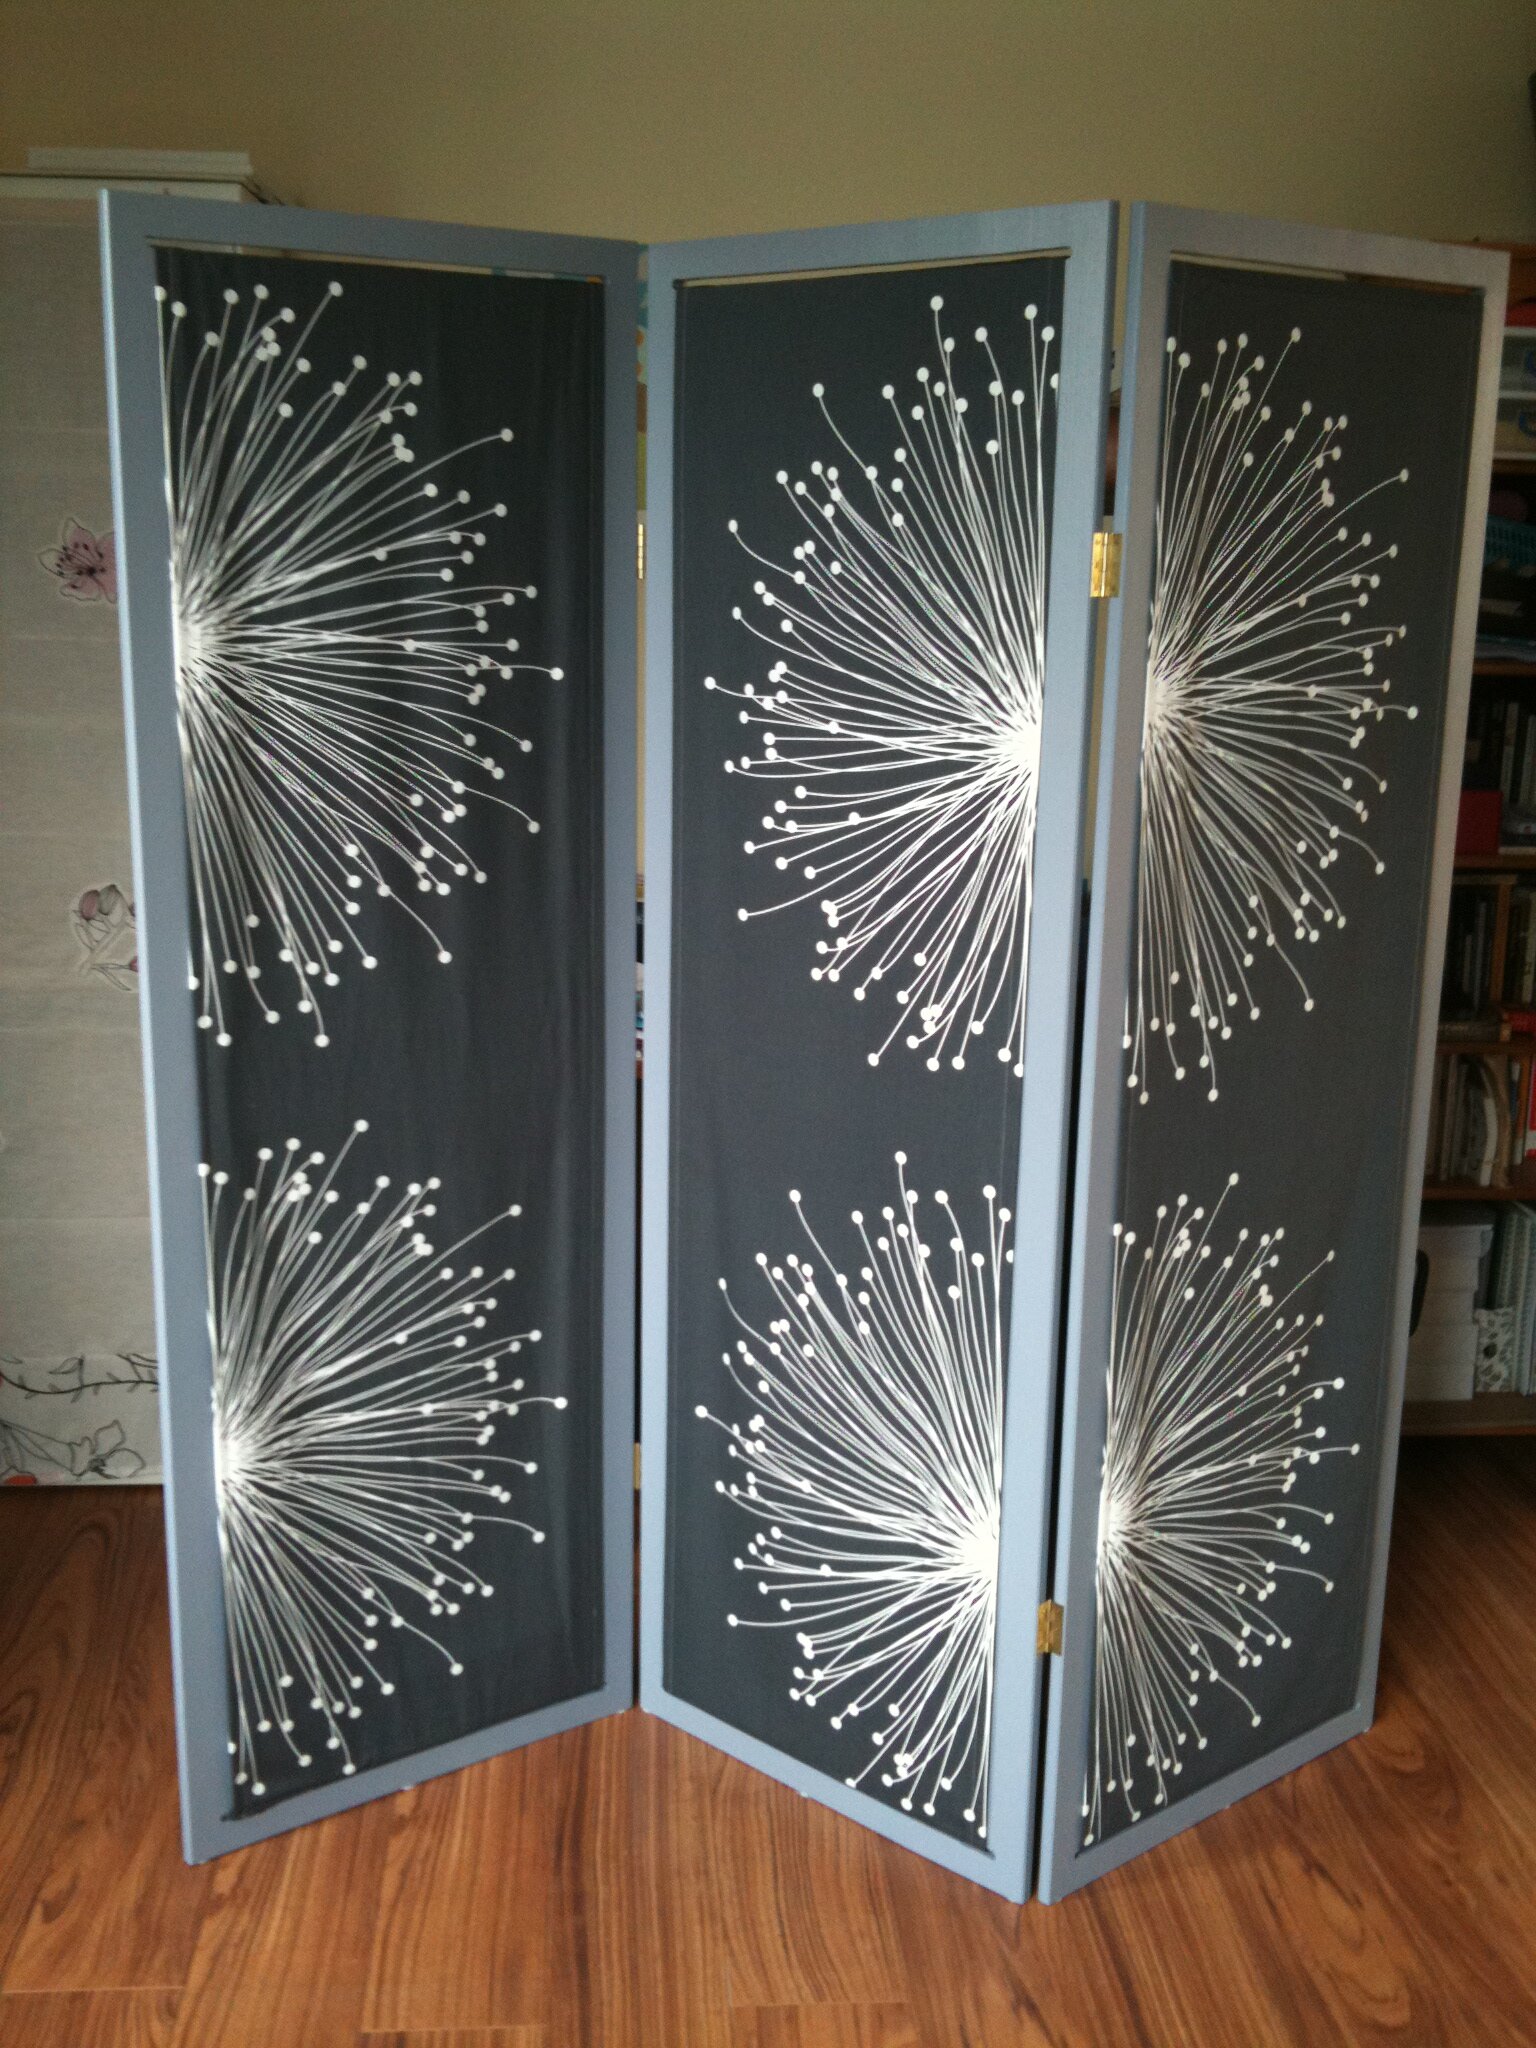 Exciting Room Dividers Diy for Your Space Room Decoration: Room Dividers Diy | Room Divider Ideas Ikea | Room Divider Ideas With Curtains